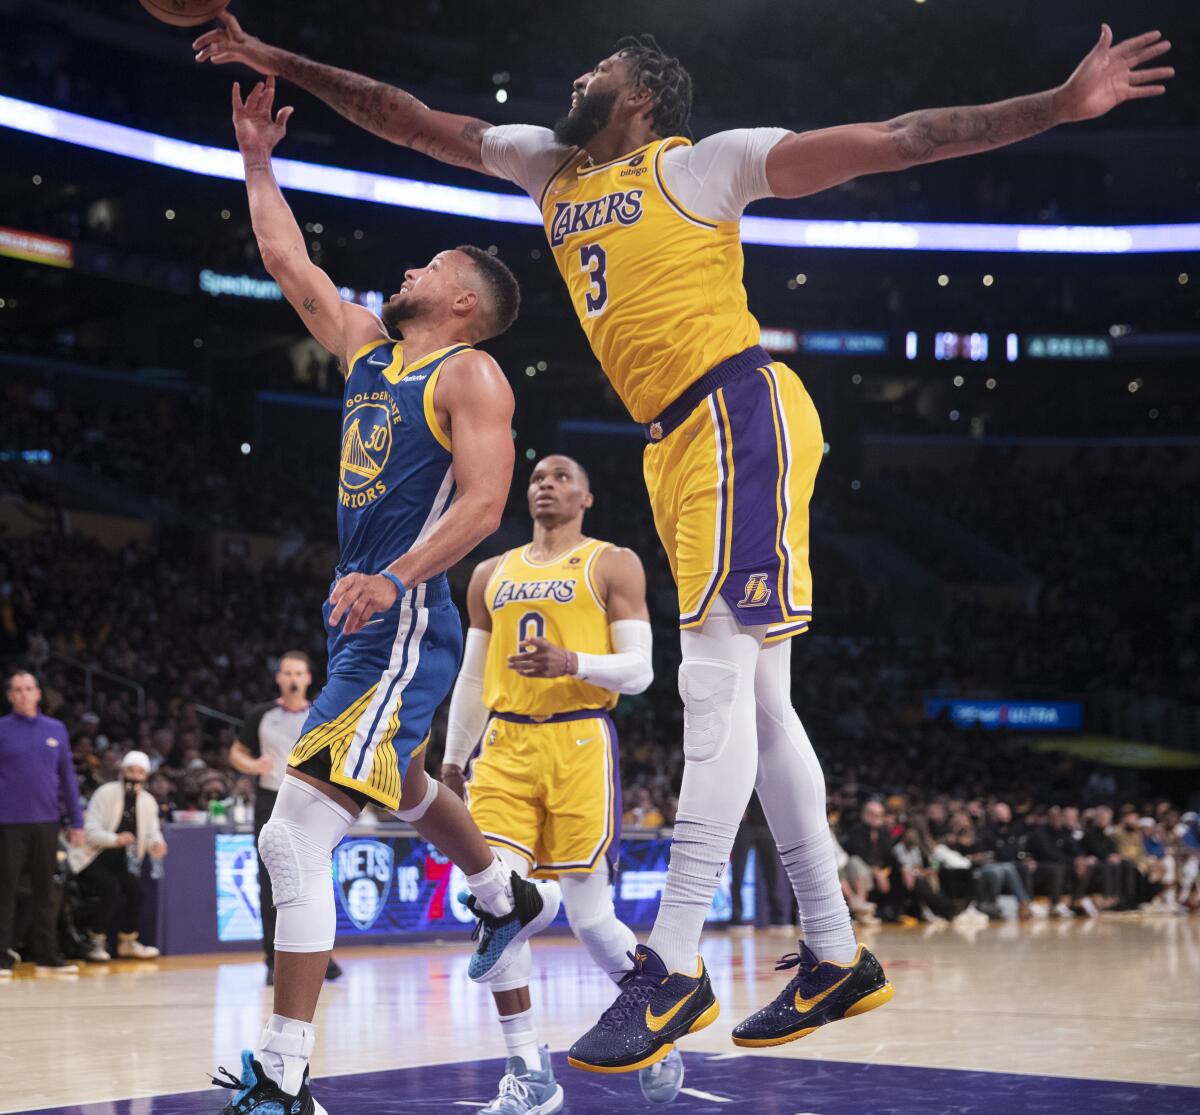 Lakers forward Anthony Davis blocks a layup by Warriors guard Stephen Curry.